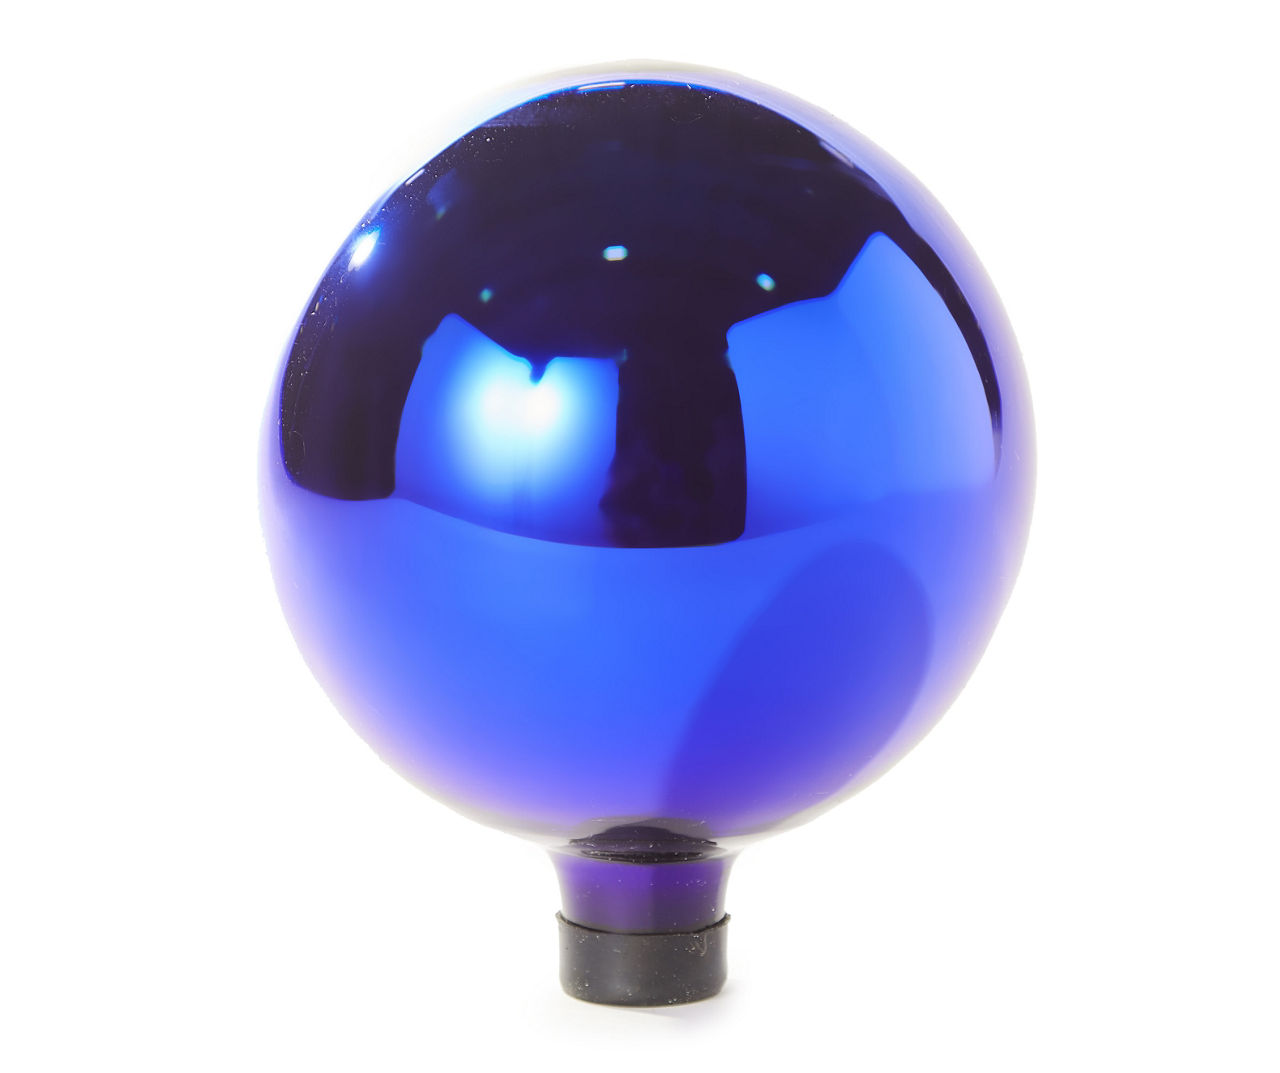 cori price recommends Big Lots Gazing Ball Stands